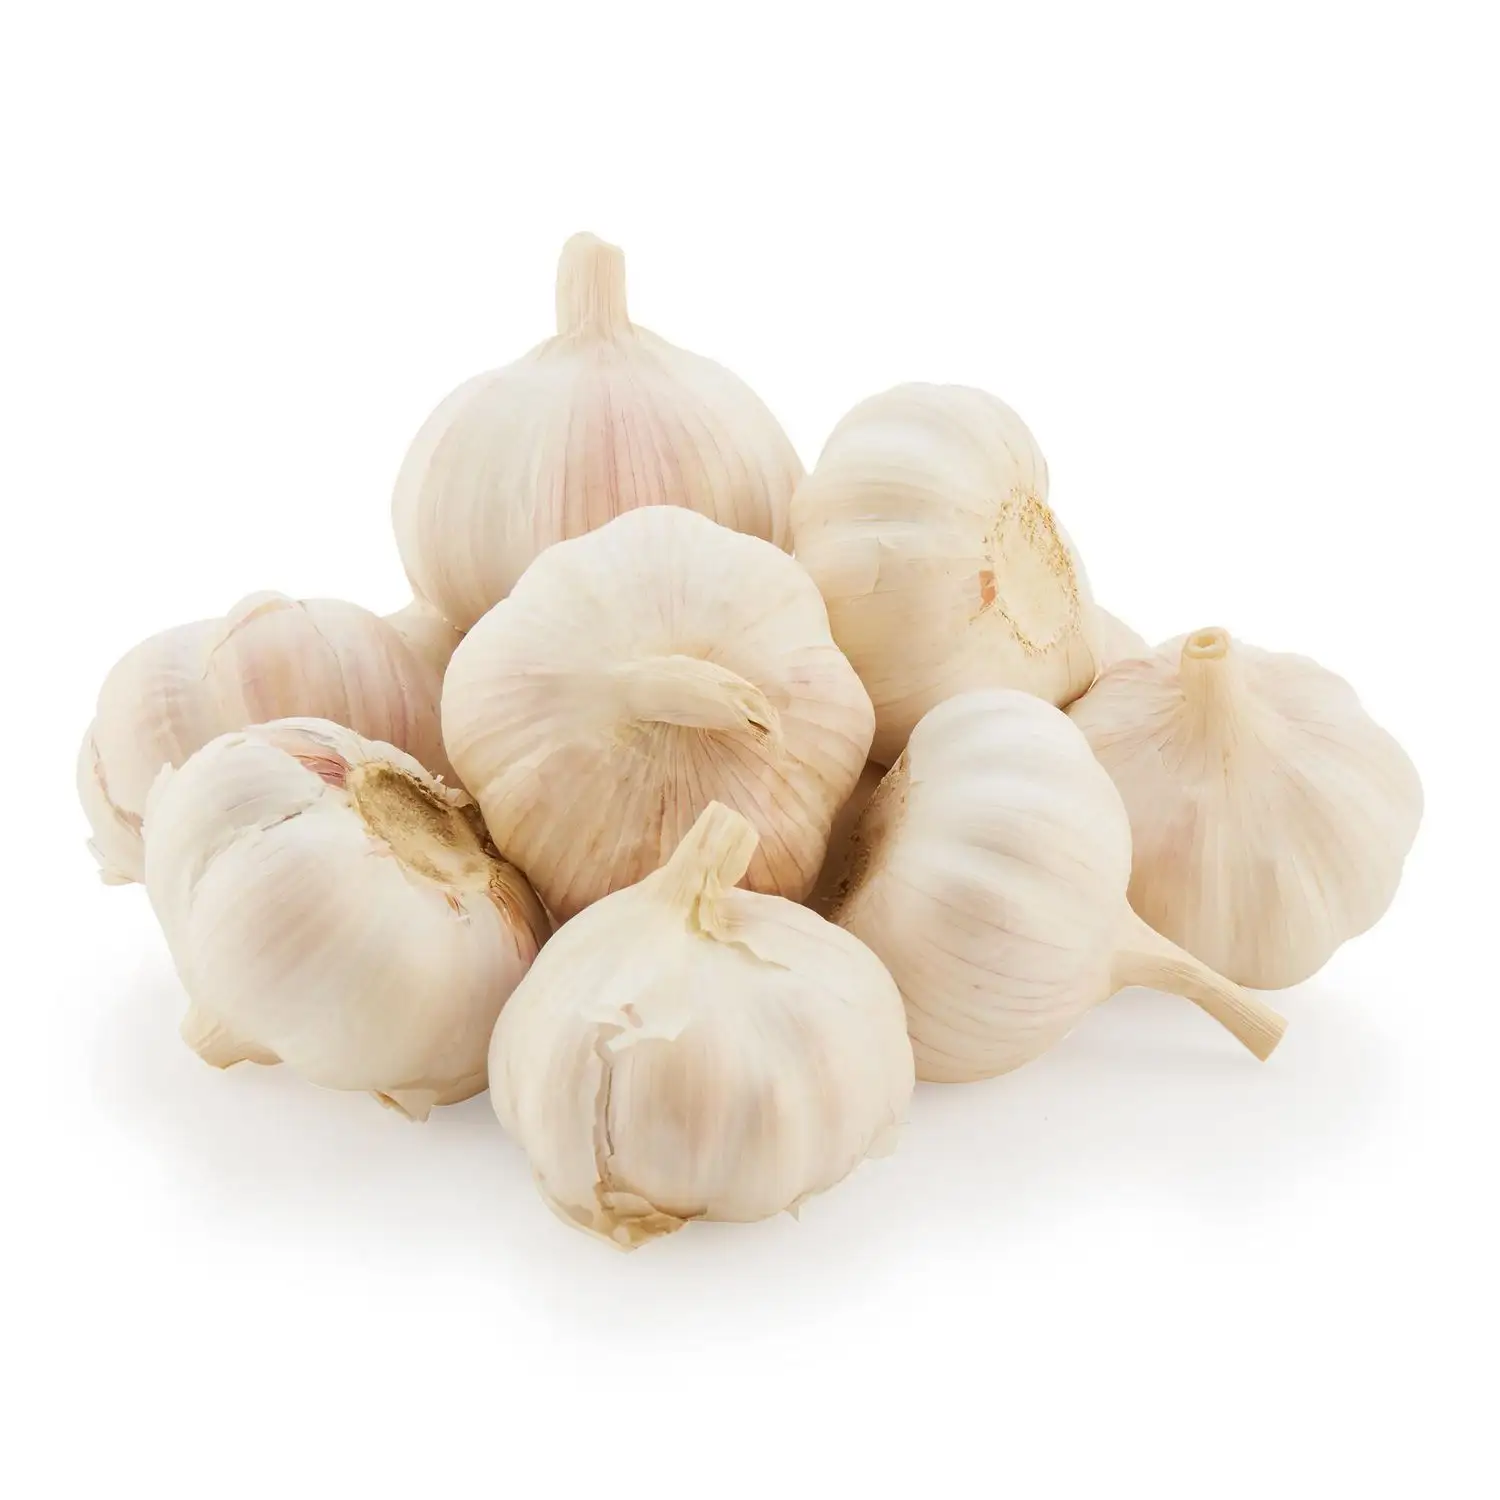 Buy wholesale fresh garlic high quality garlic available for sale